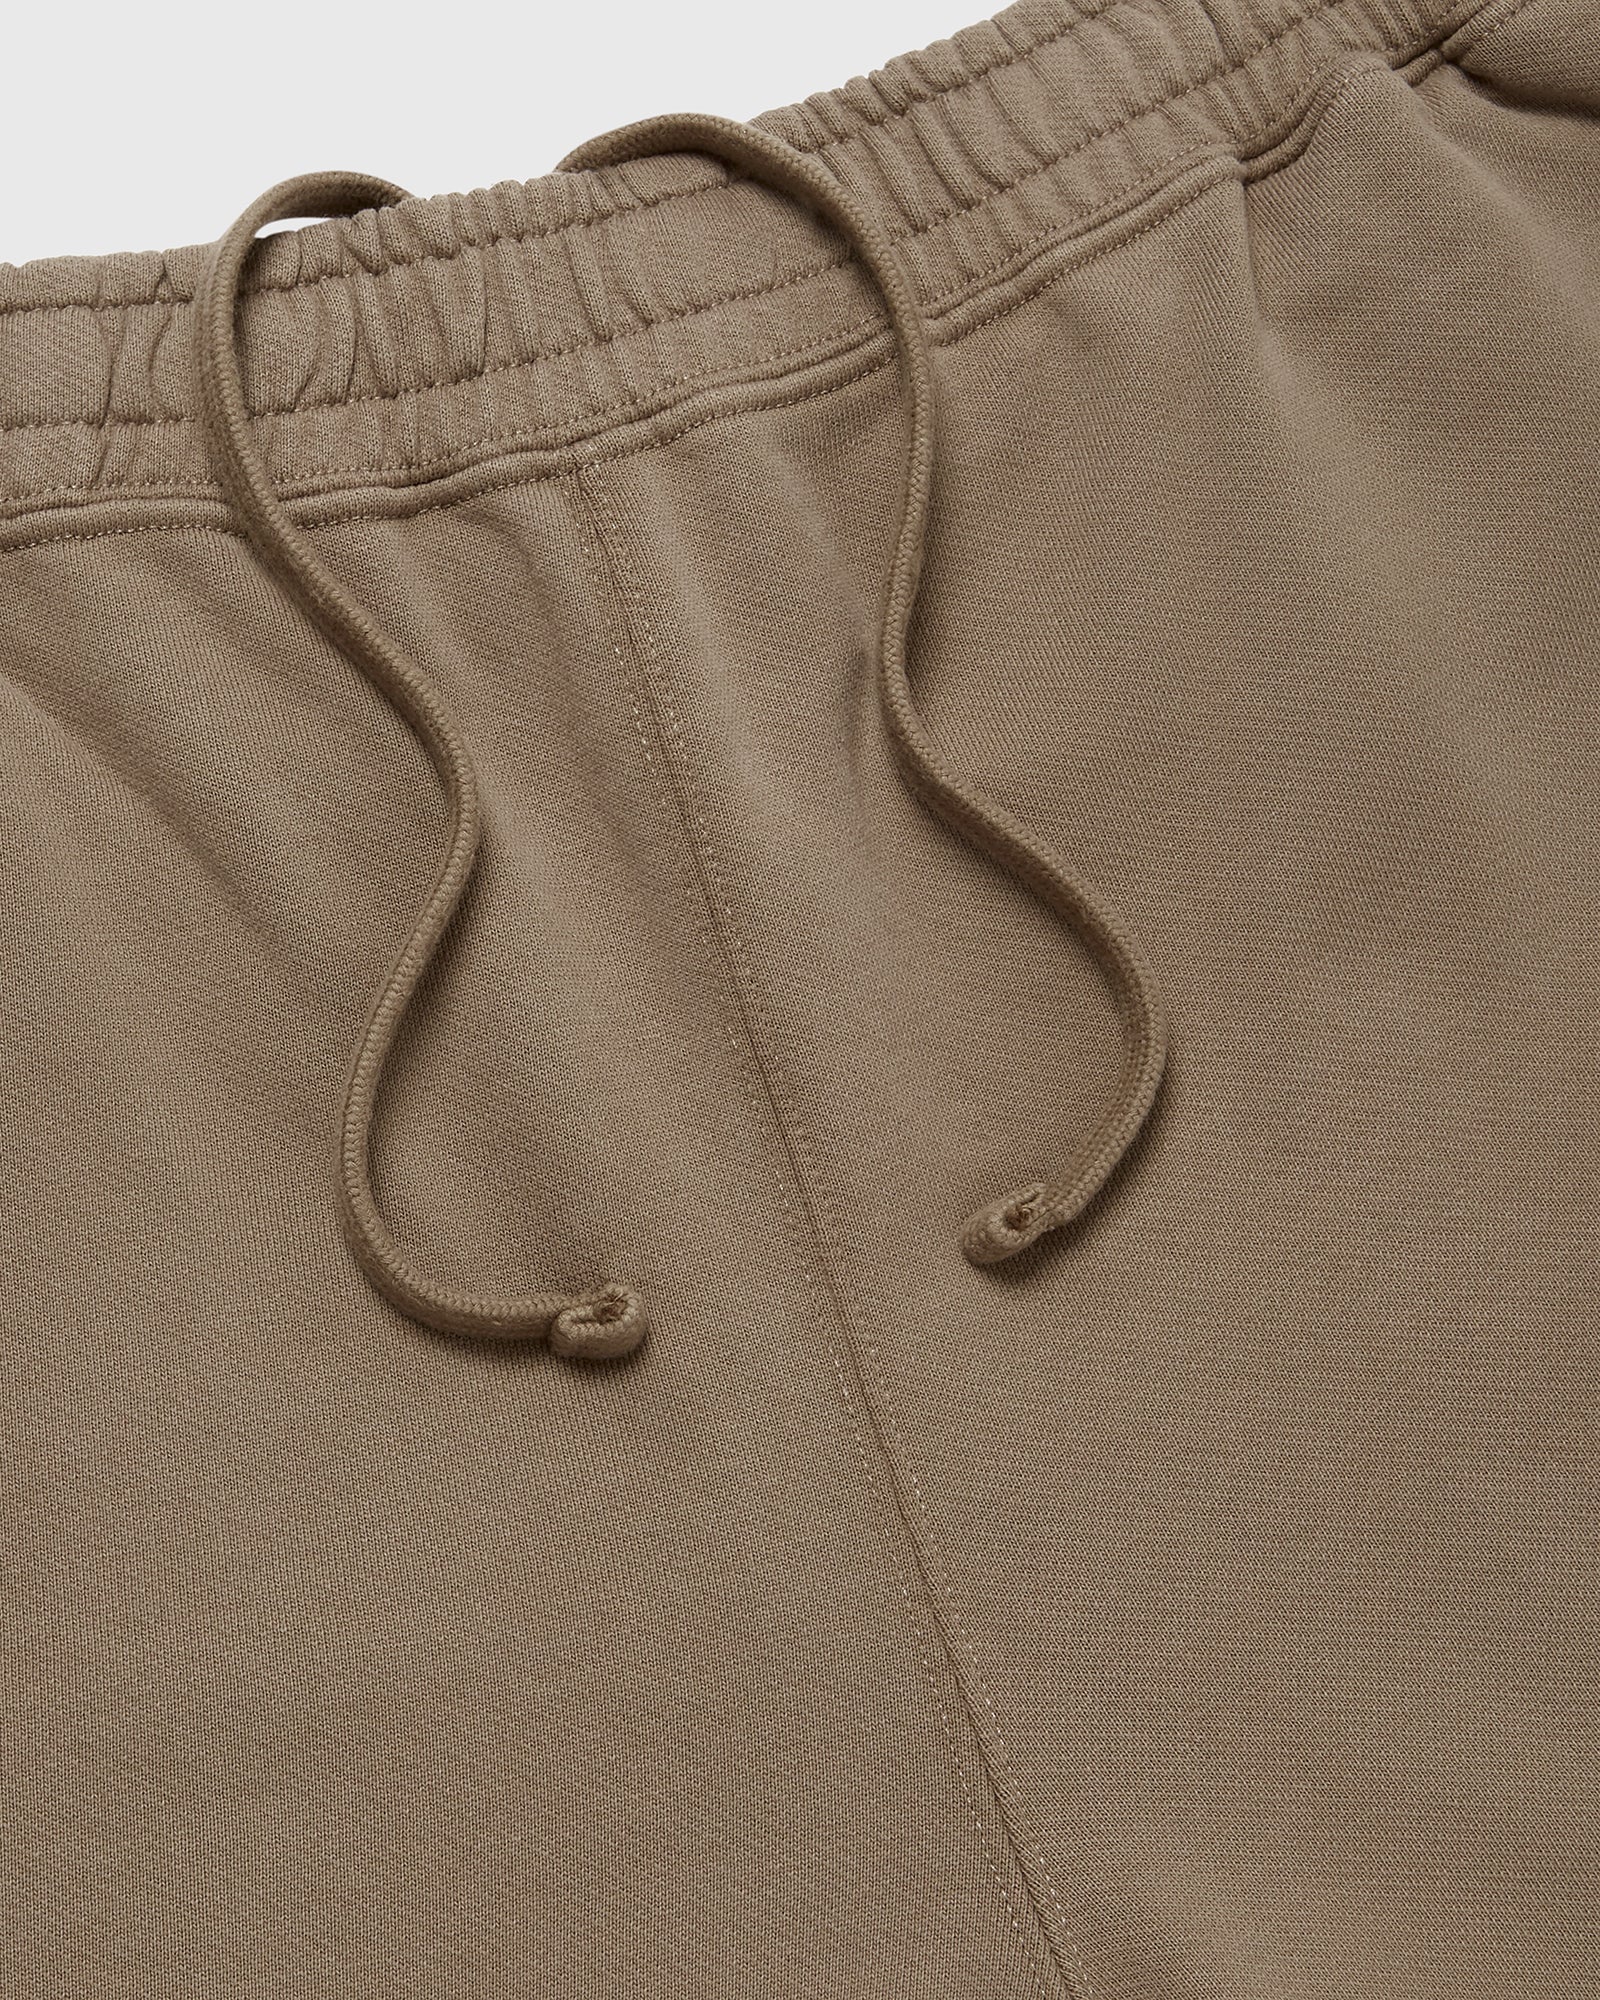 Classic Relaxed Fit Sweatpant - Taupe